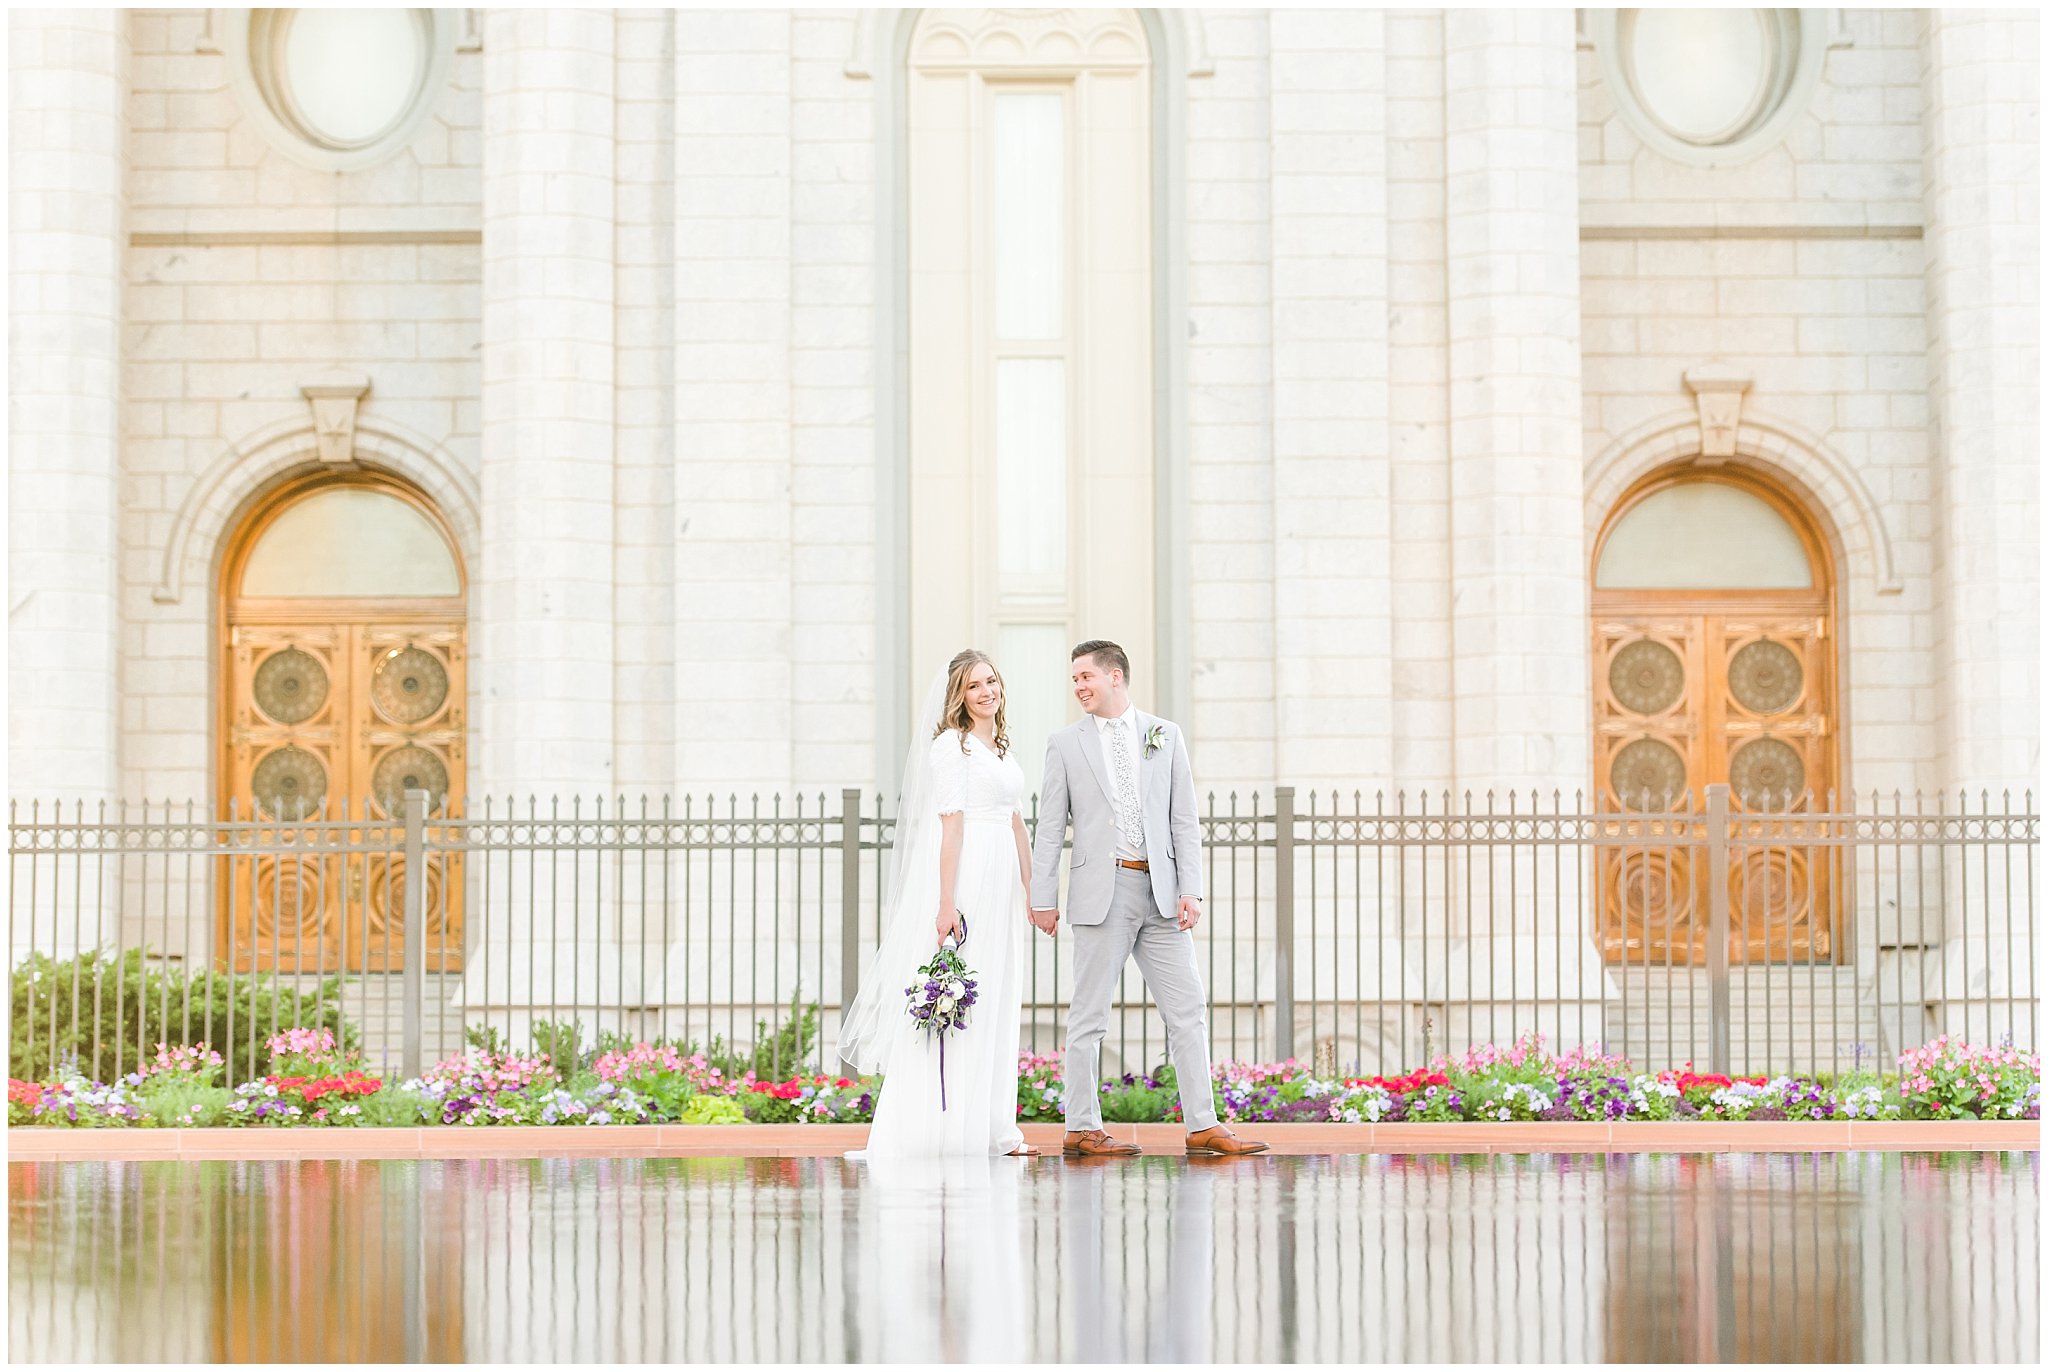 Bride and groom walk in front of reflection pool at the Salt Lake Temple | Top Utah Wedding and Couples Photos 2019 | Jessie and Dallin Photography